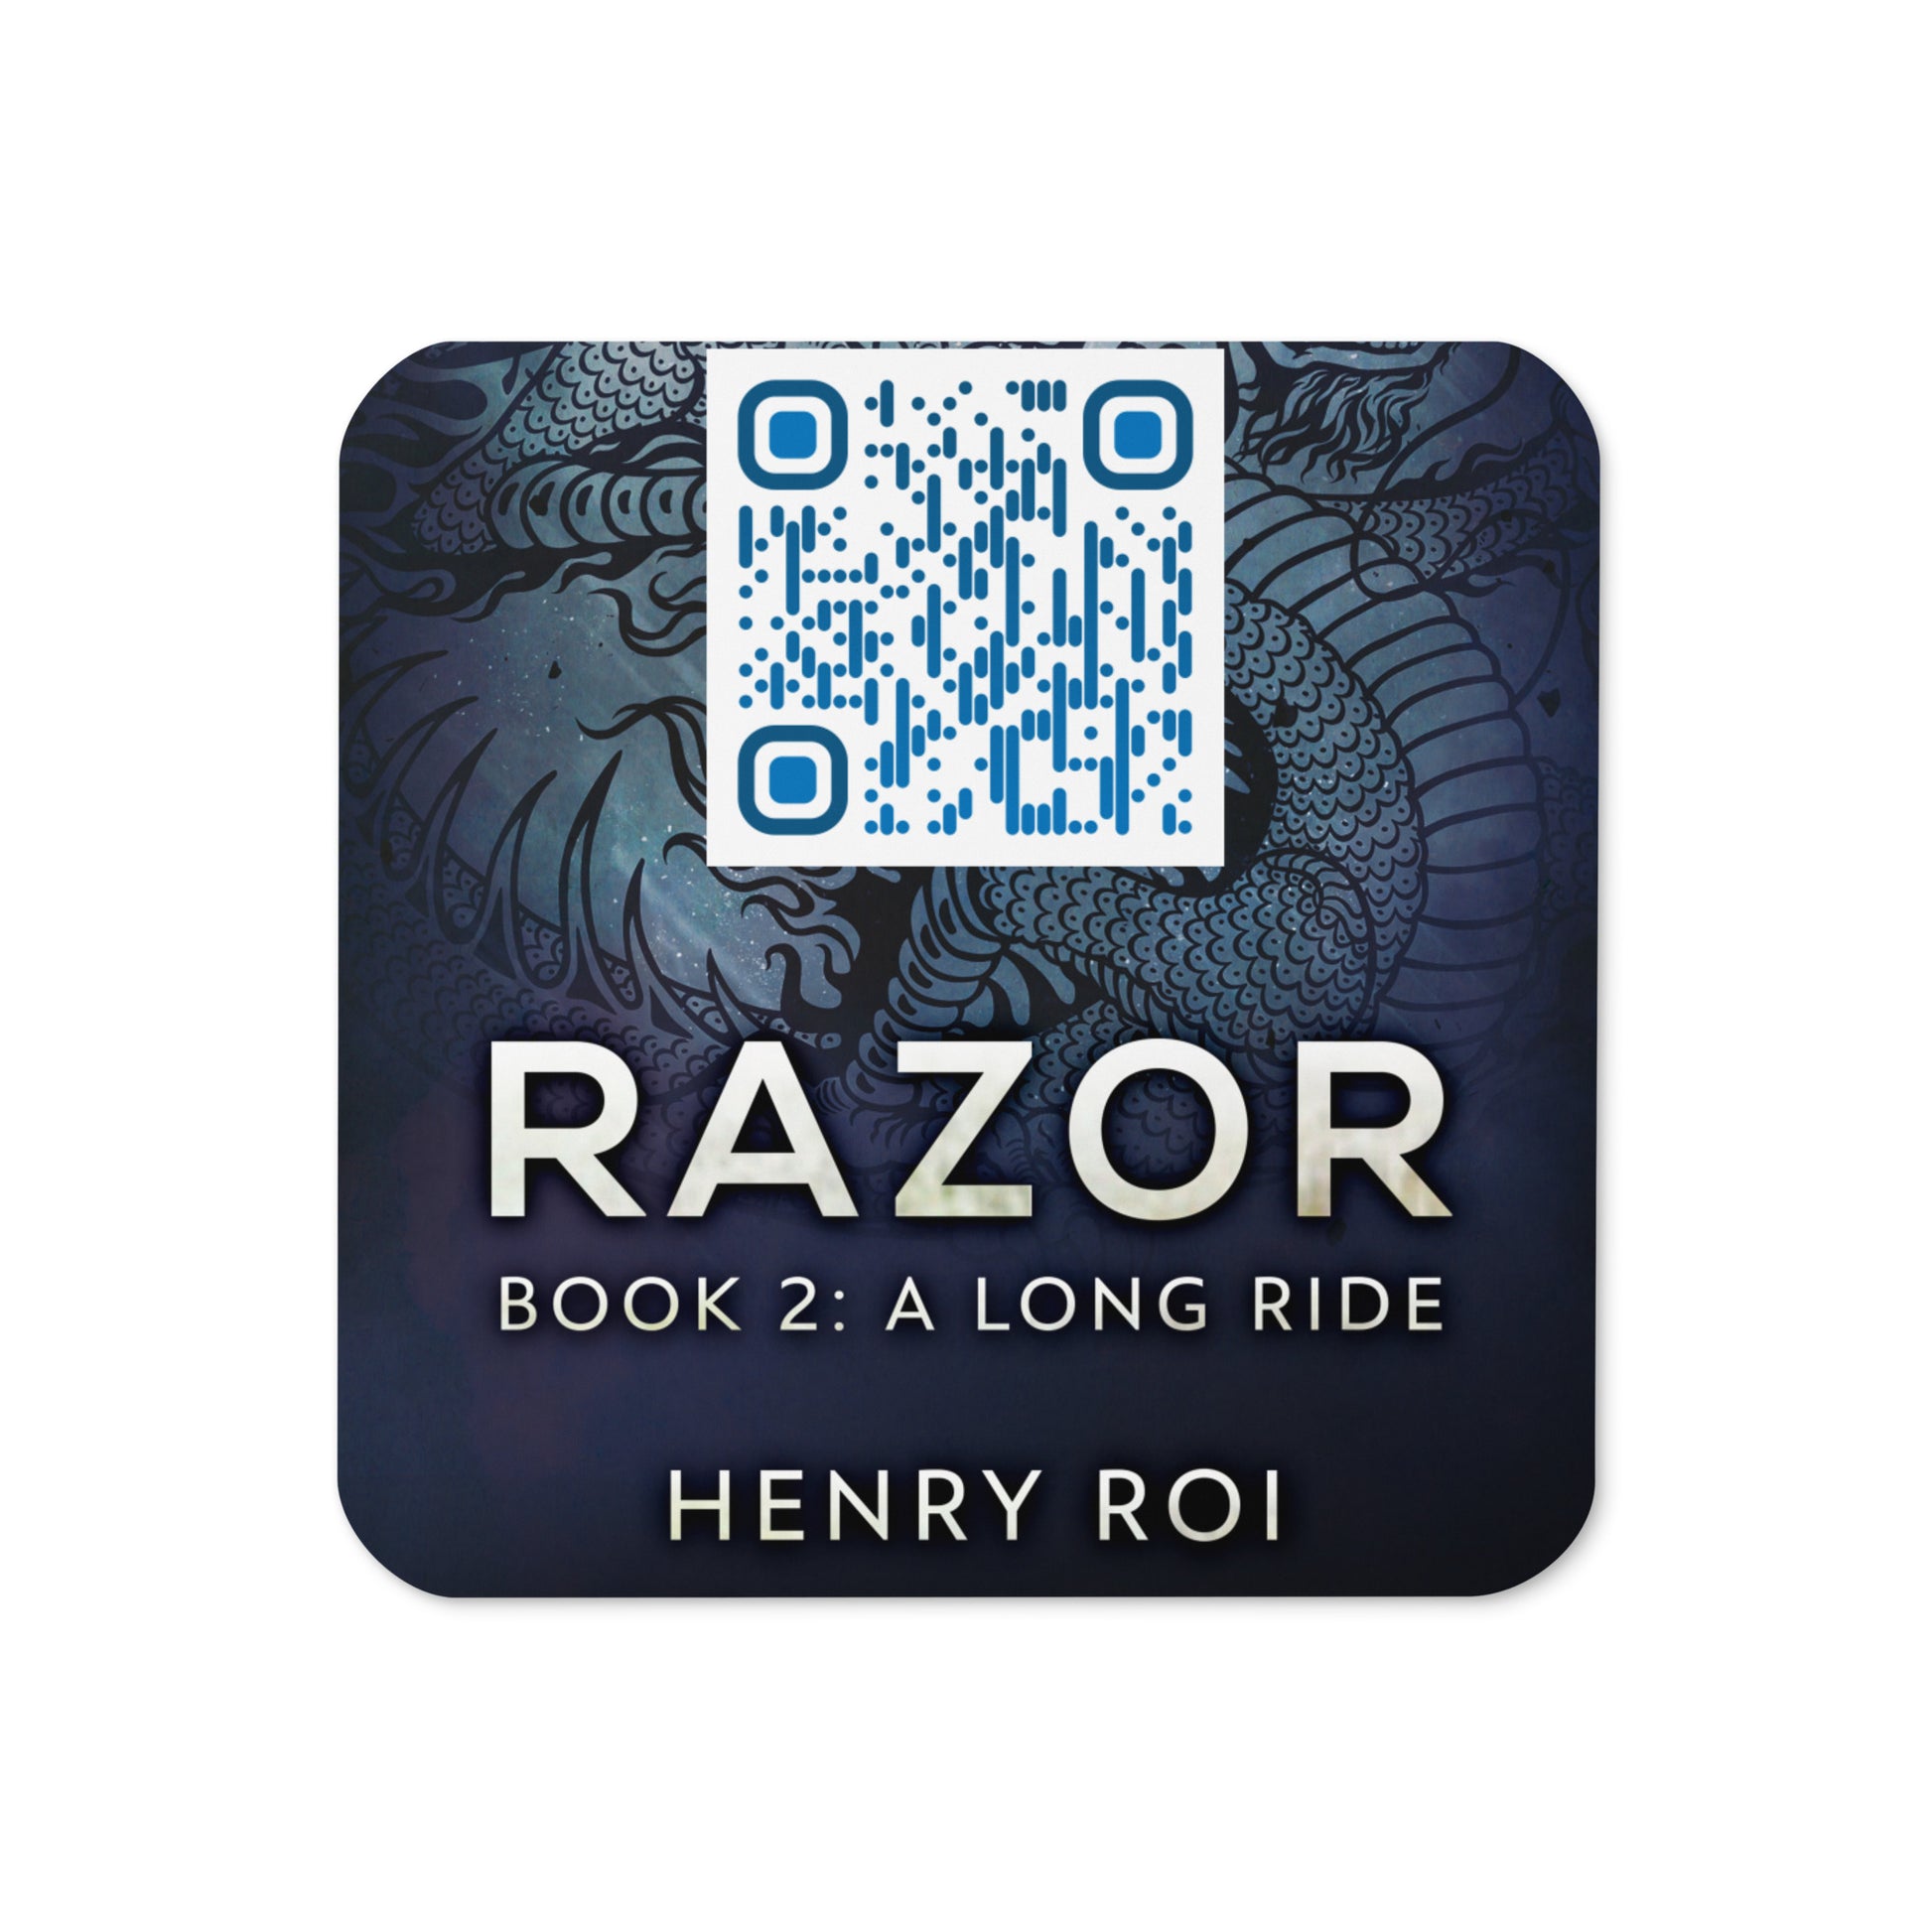 coaster with cover art from Henry Roi's book A Long Ride